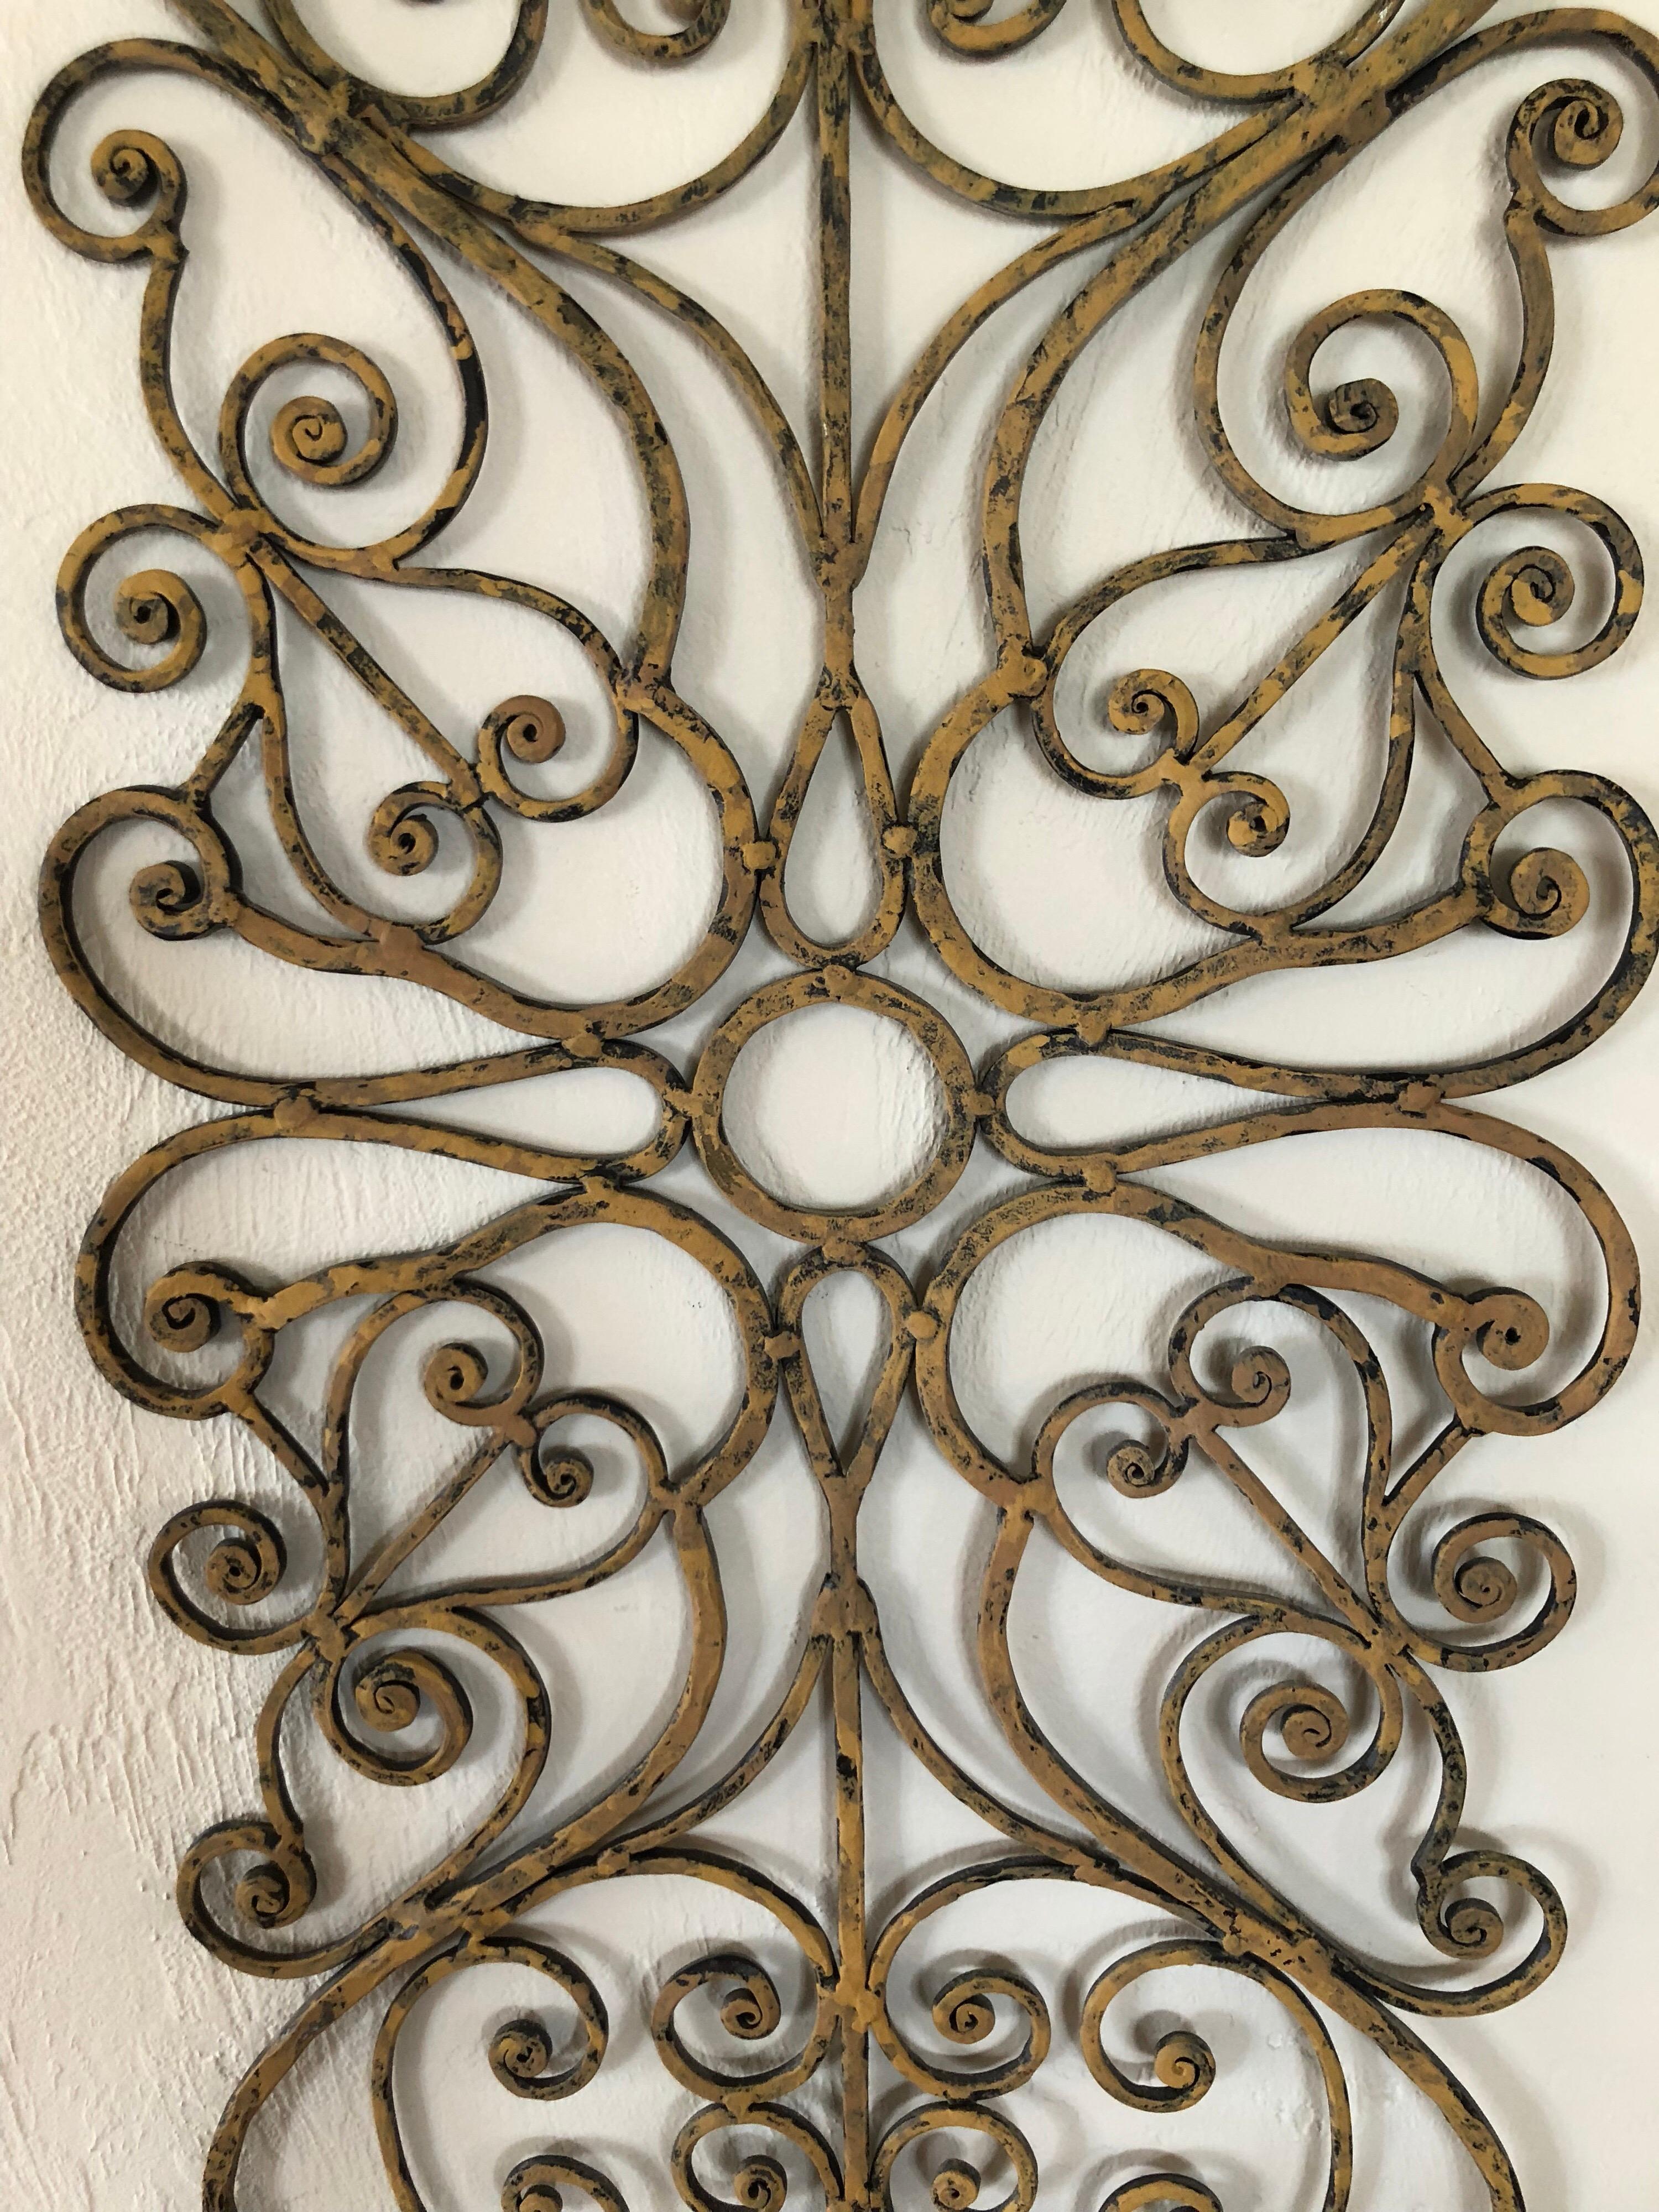 Large Hand-Wrought Iron Wall Sculpture 12